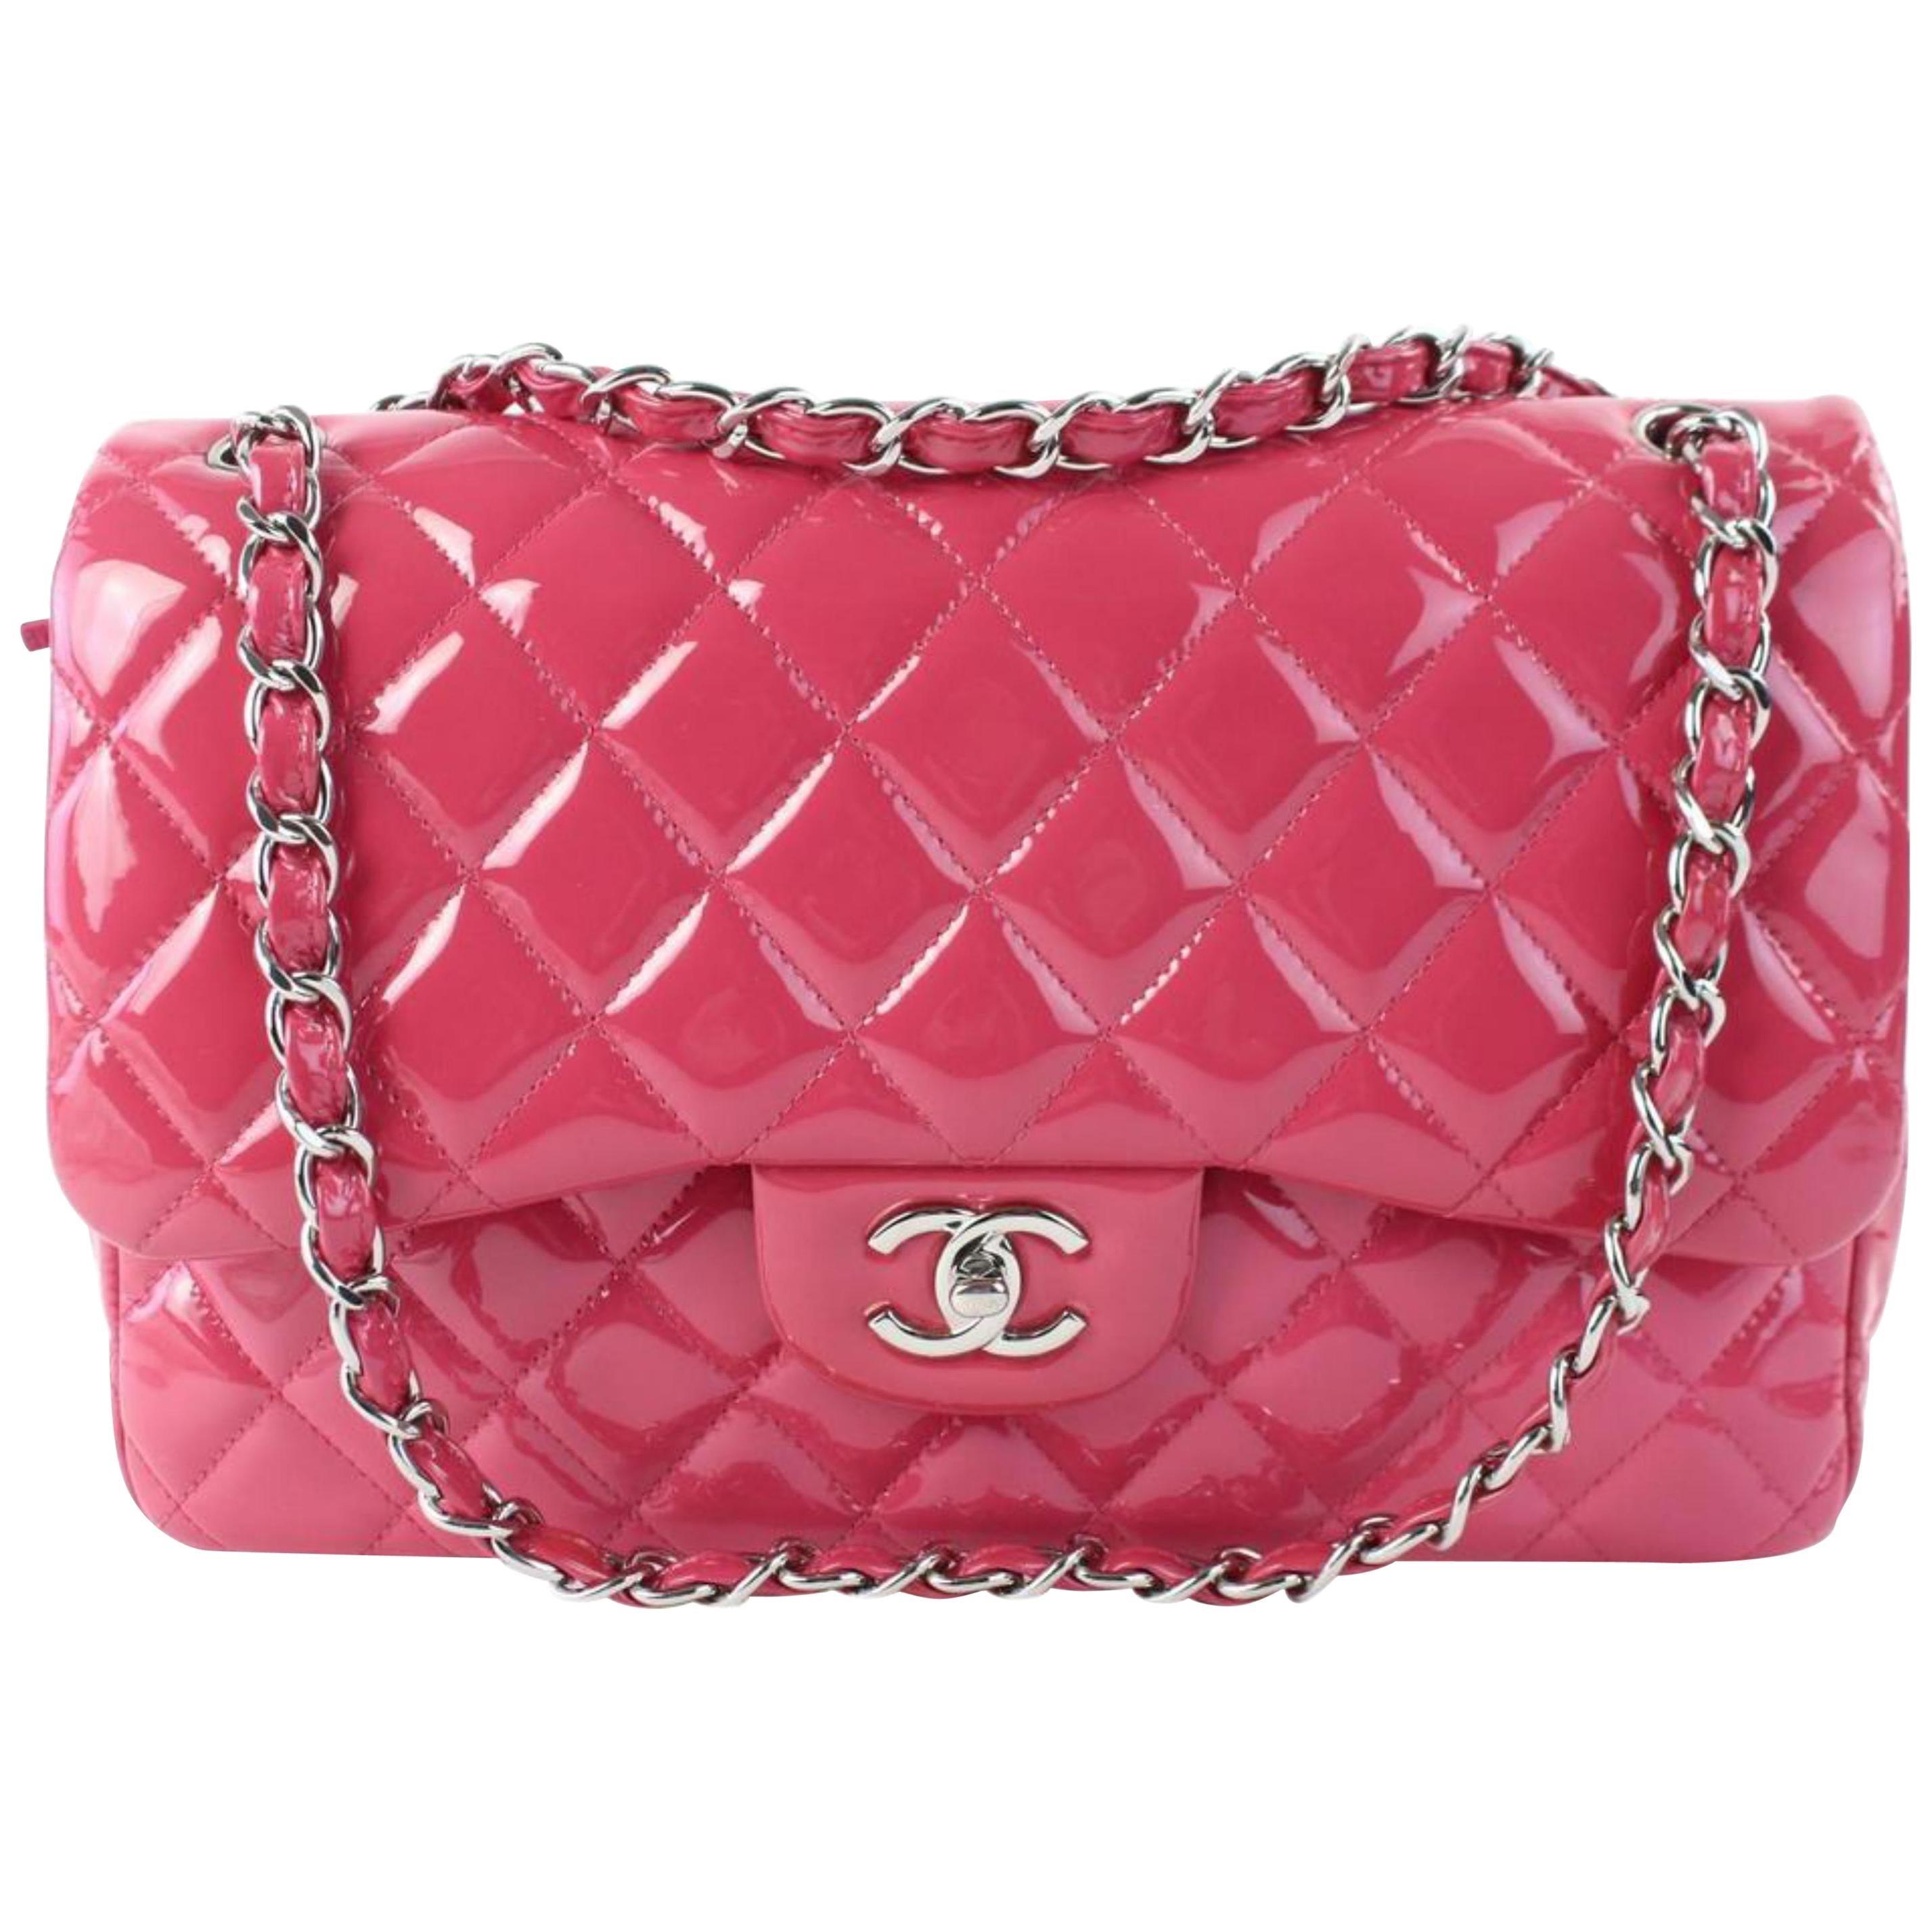 Chanel Classic Quilted Jumbo Flap 01cz0720 Dark Pink Patent Leather Shoulder Bag